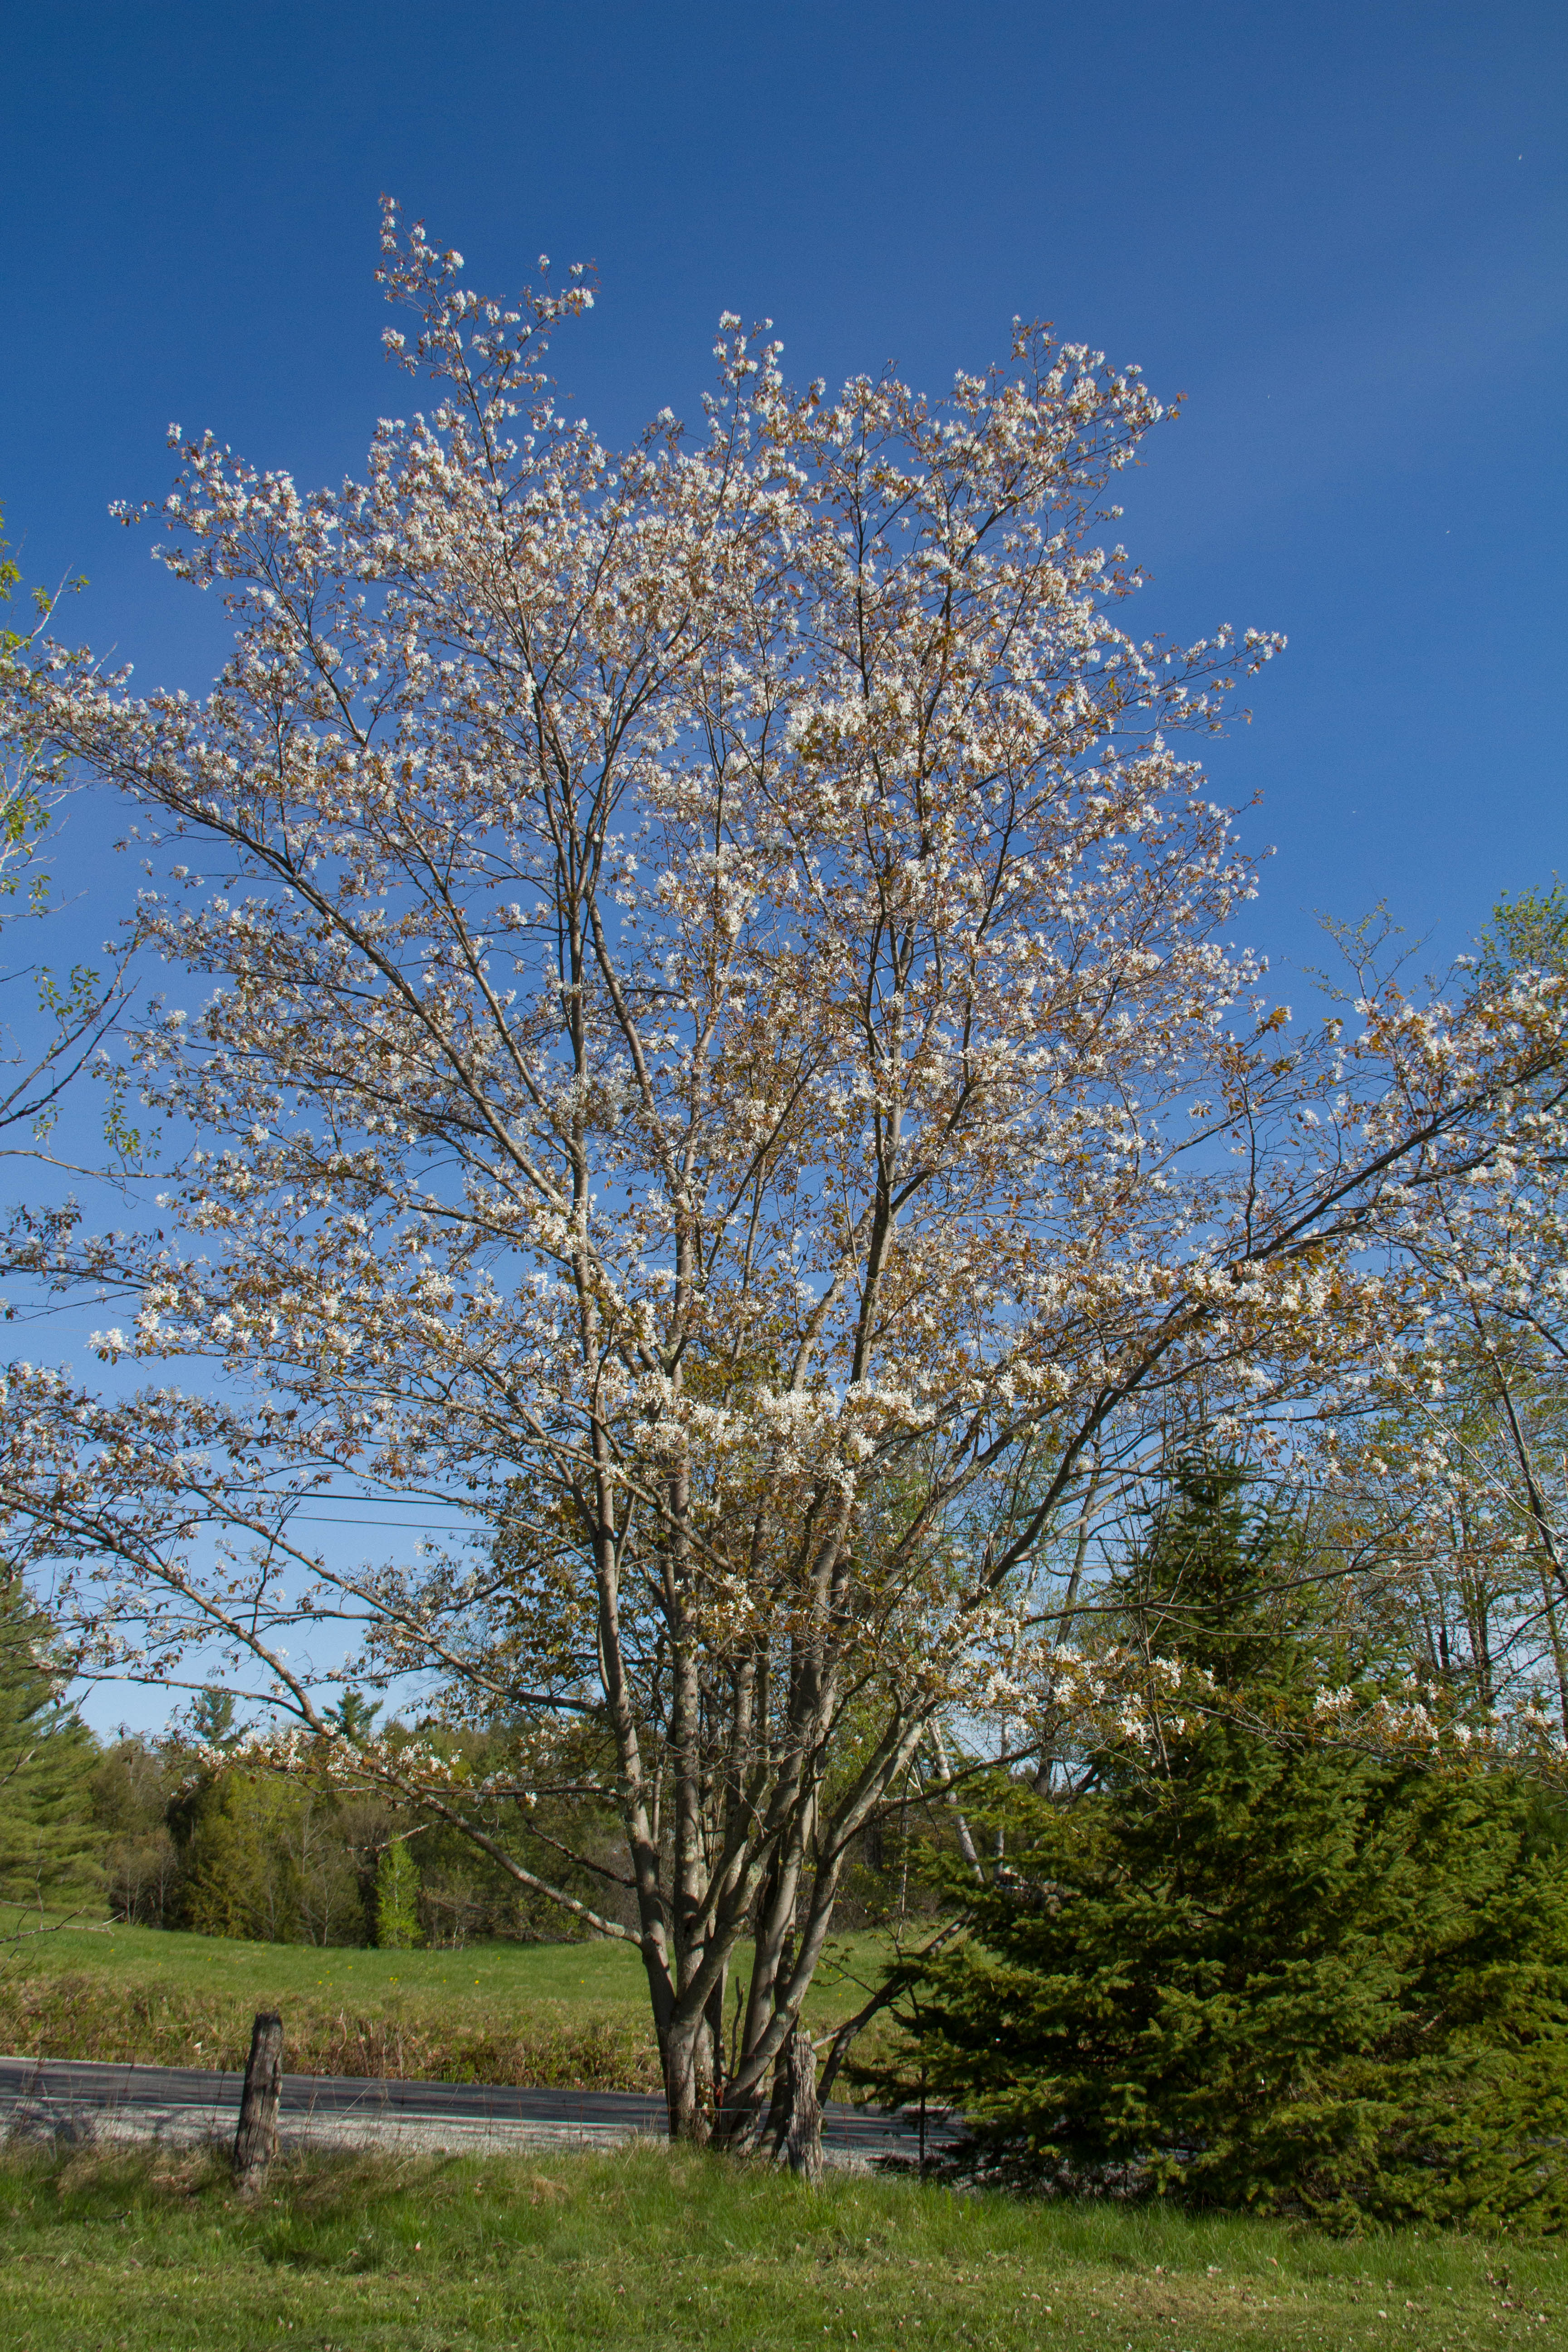 One of the many cherry trees now blooming everywhere. There seem to be more blooms this year than usual. 